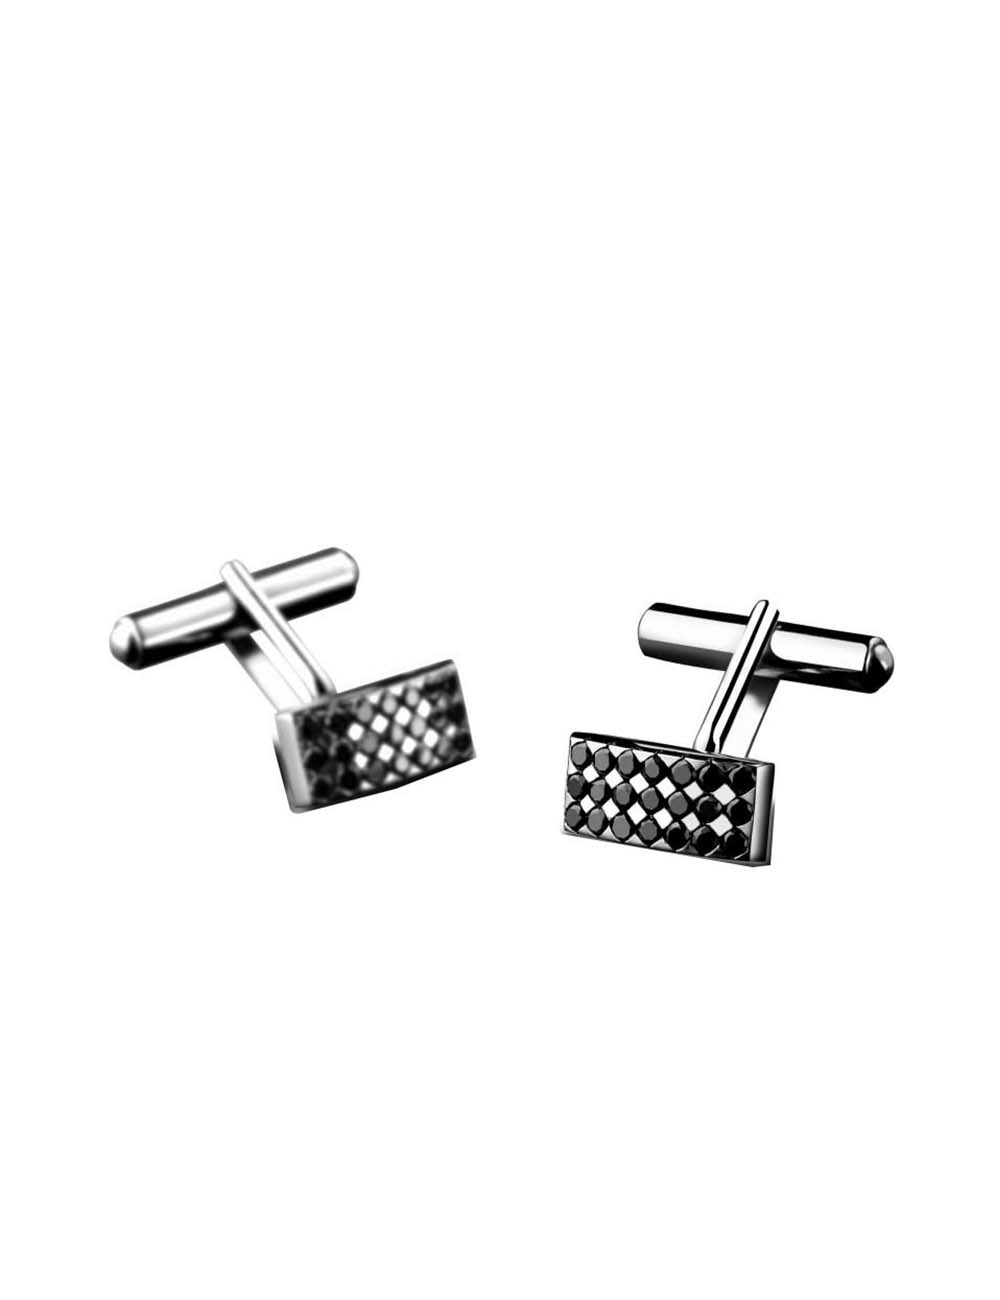 Mystérieux cufflinks in white gold, set with black diamonds, add a captivating and enigmatic touch to your attire.